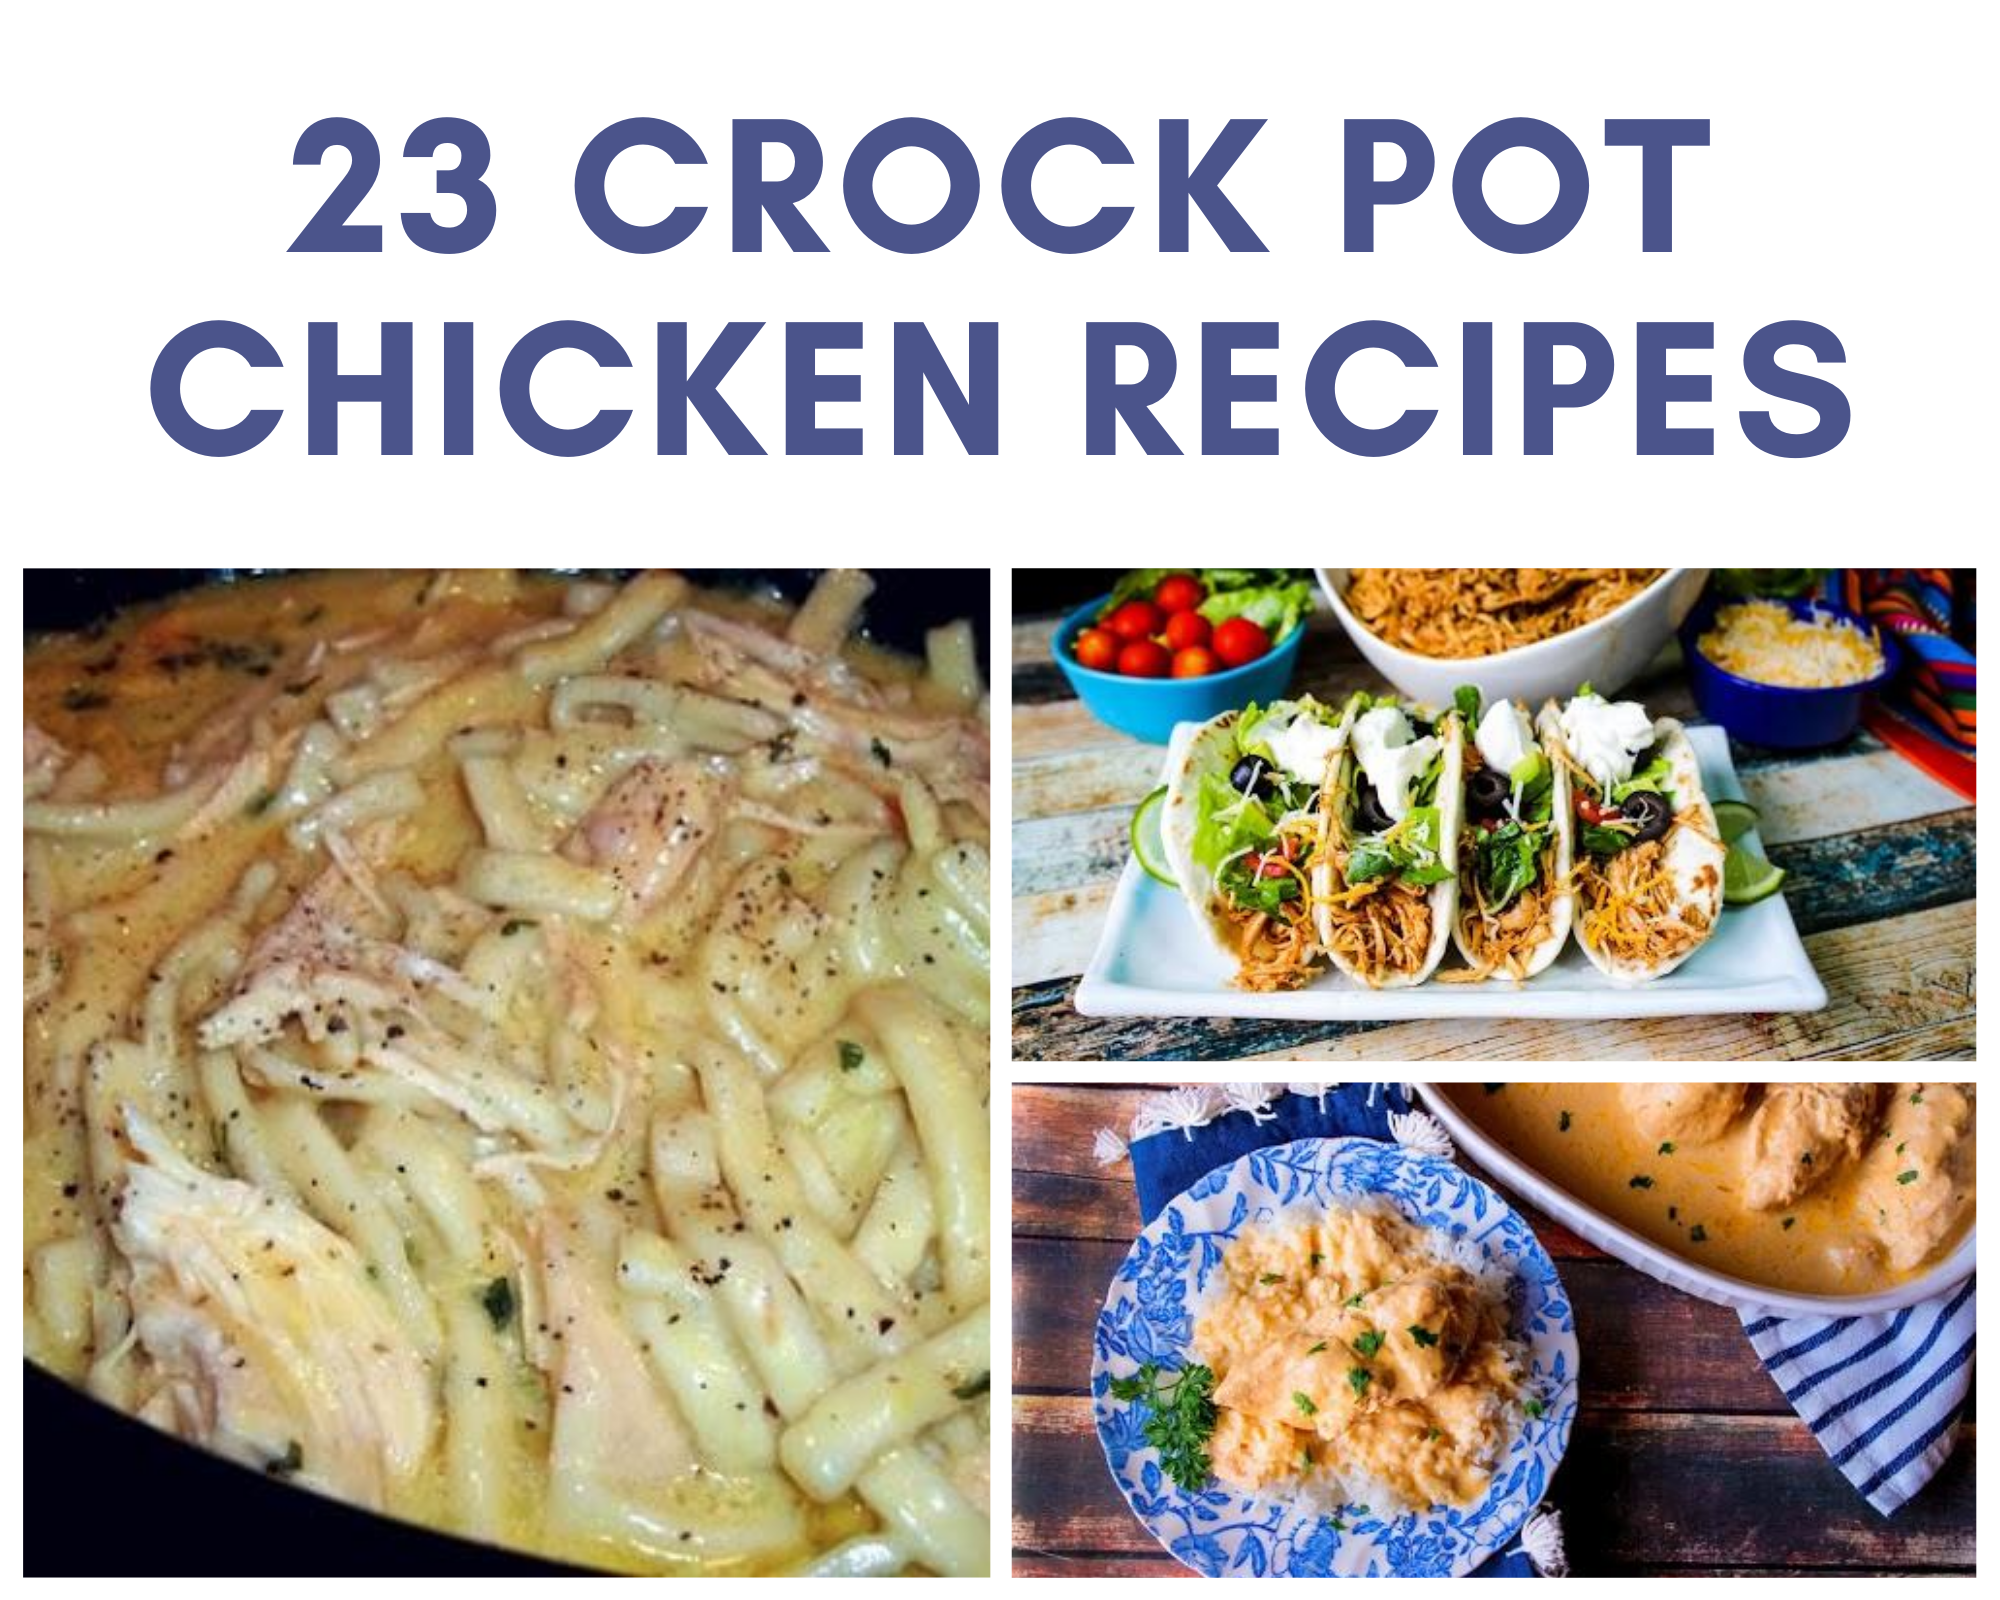 Crock pot chicken and noodles, crock pot chicken tacos and more